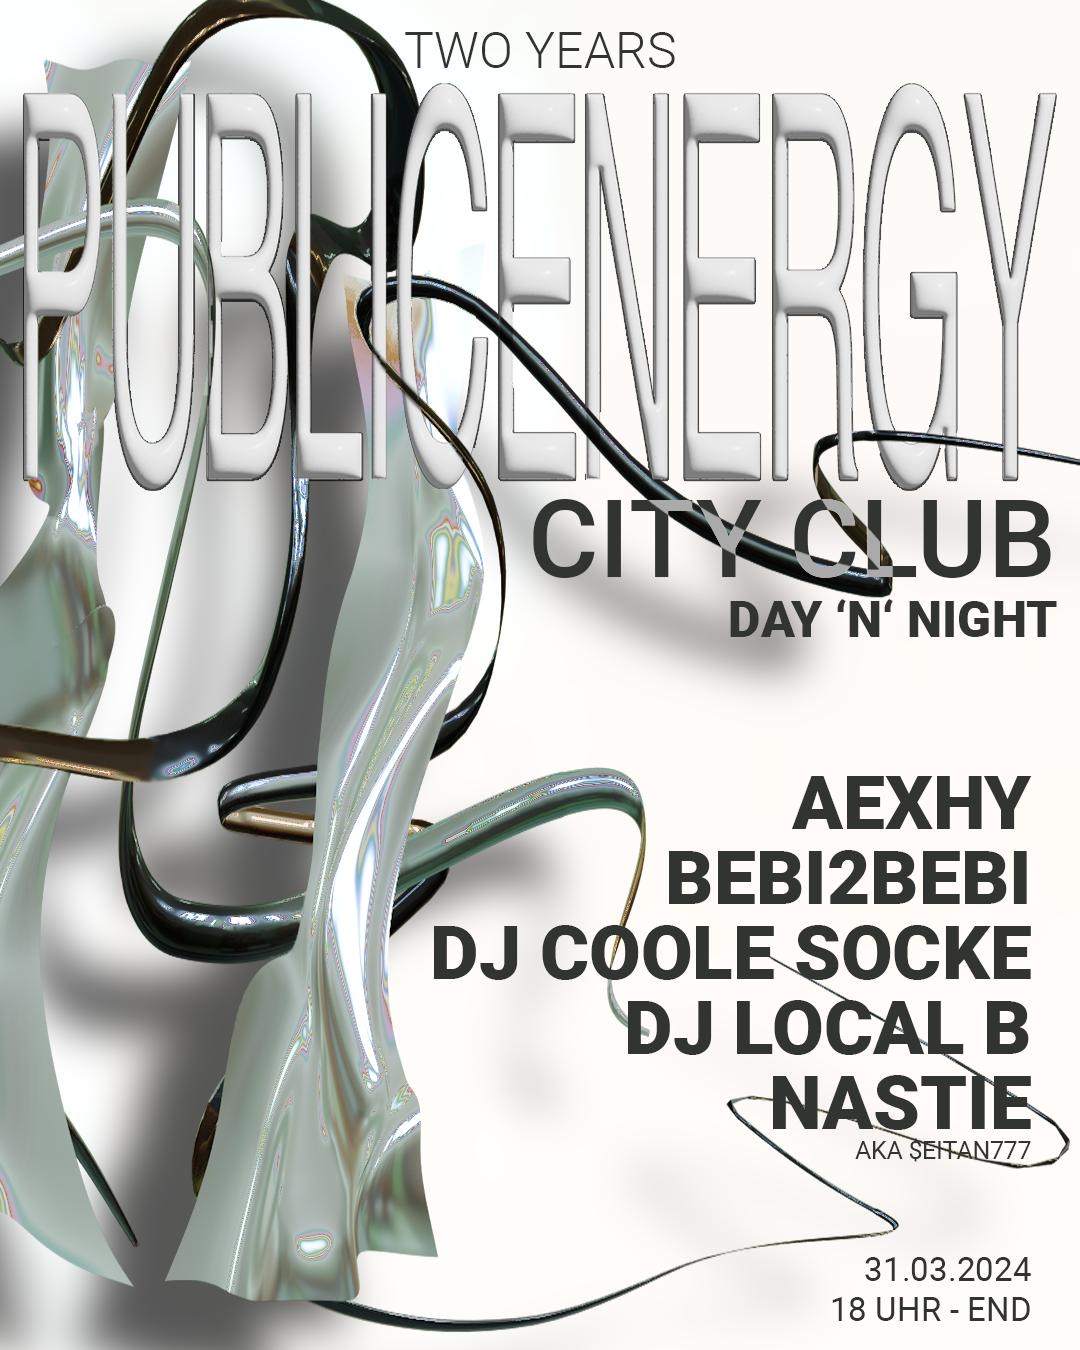 2 YEARS PUBLICENERGY dAy N niGht - フライヤー表